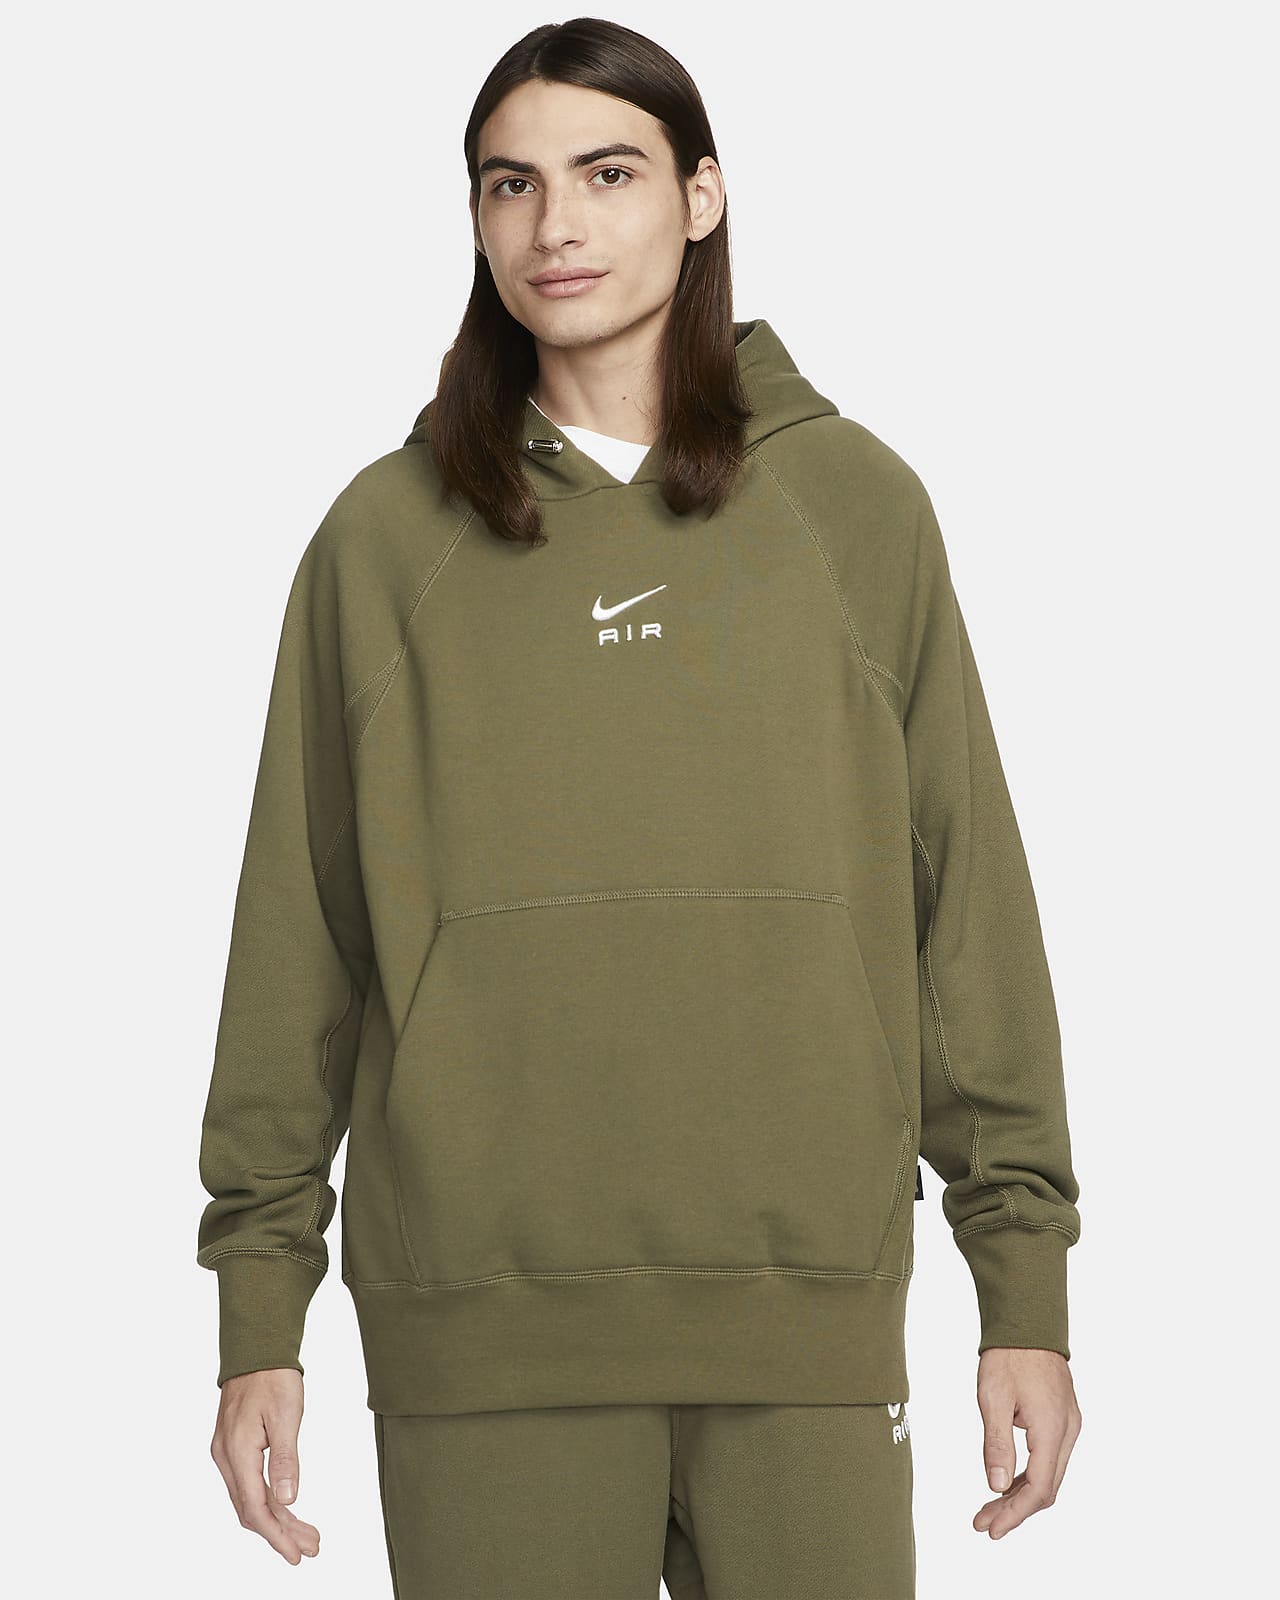 Nike Sportswear Air Men's French Terry Pullover Hoodie. Nike PT